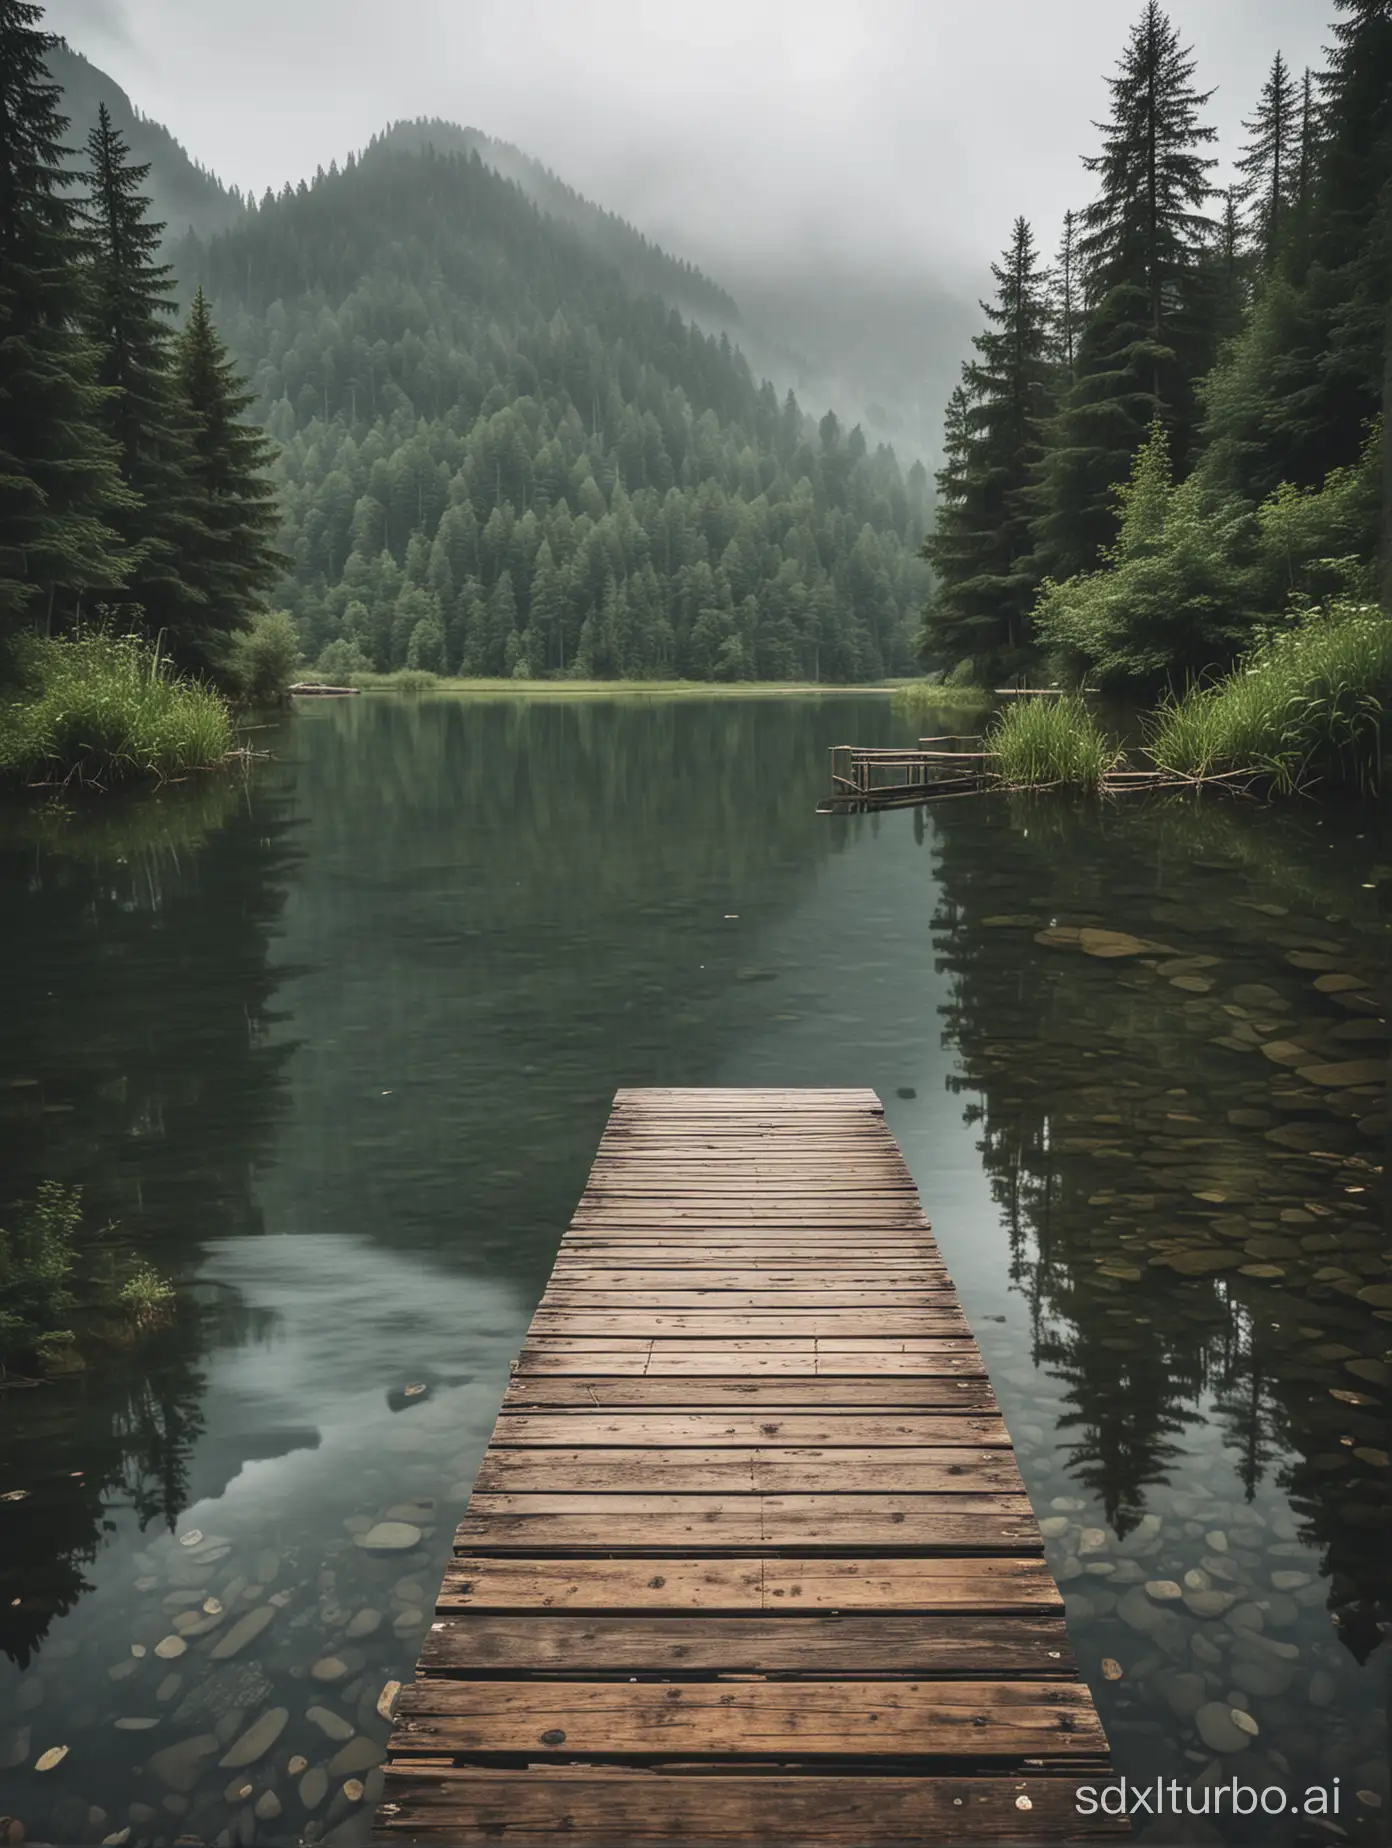 Serene-Lakeside-Dock-Amidst-Verdant-Forests-and-Impending-Rain